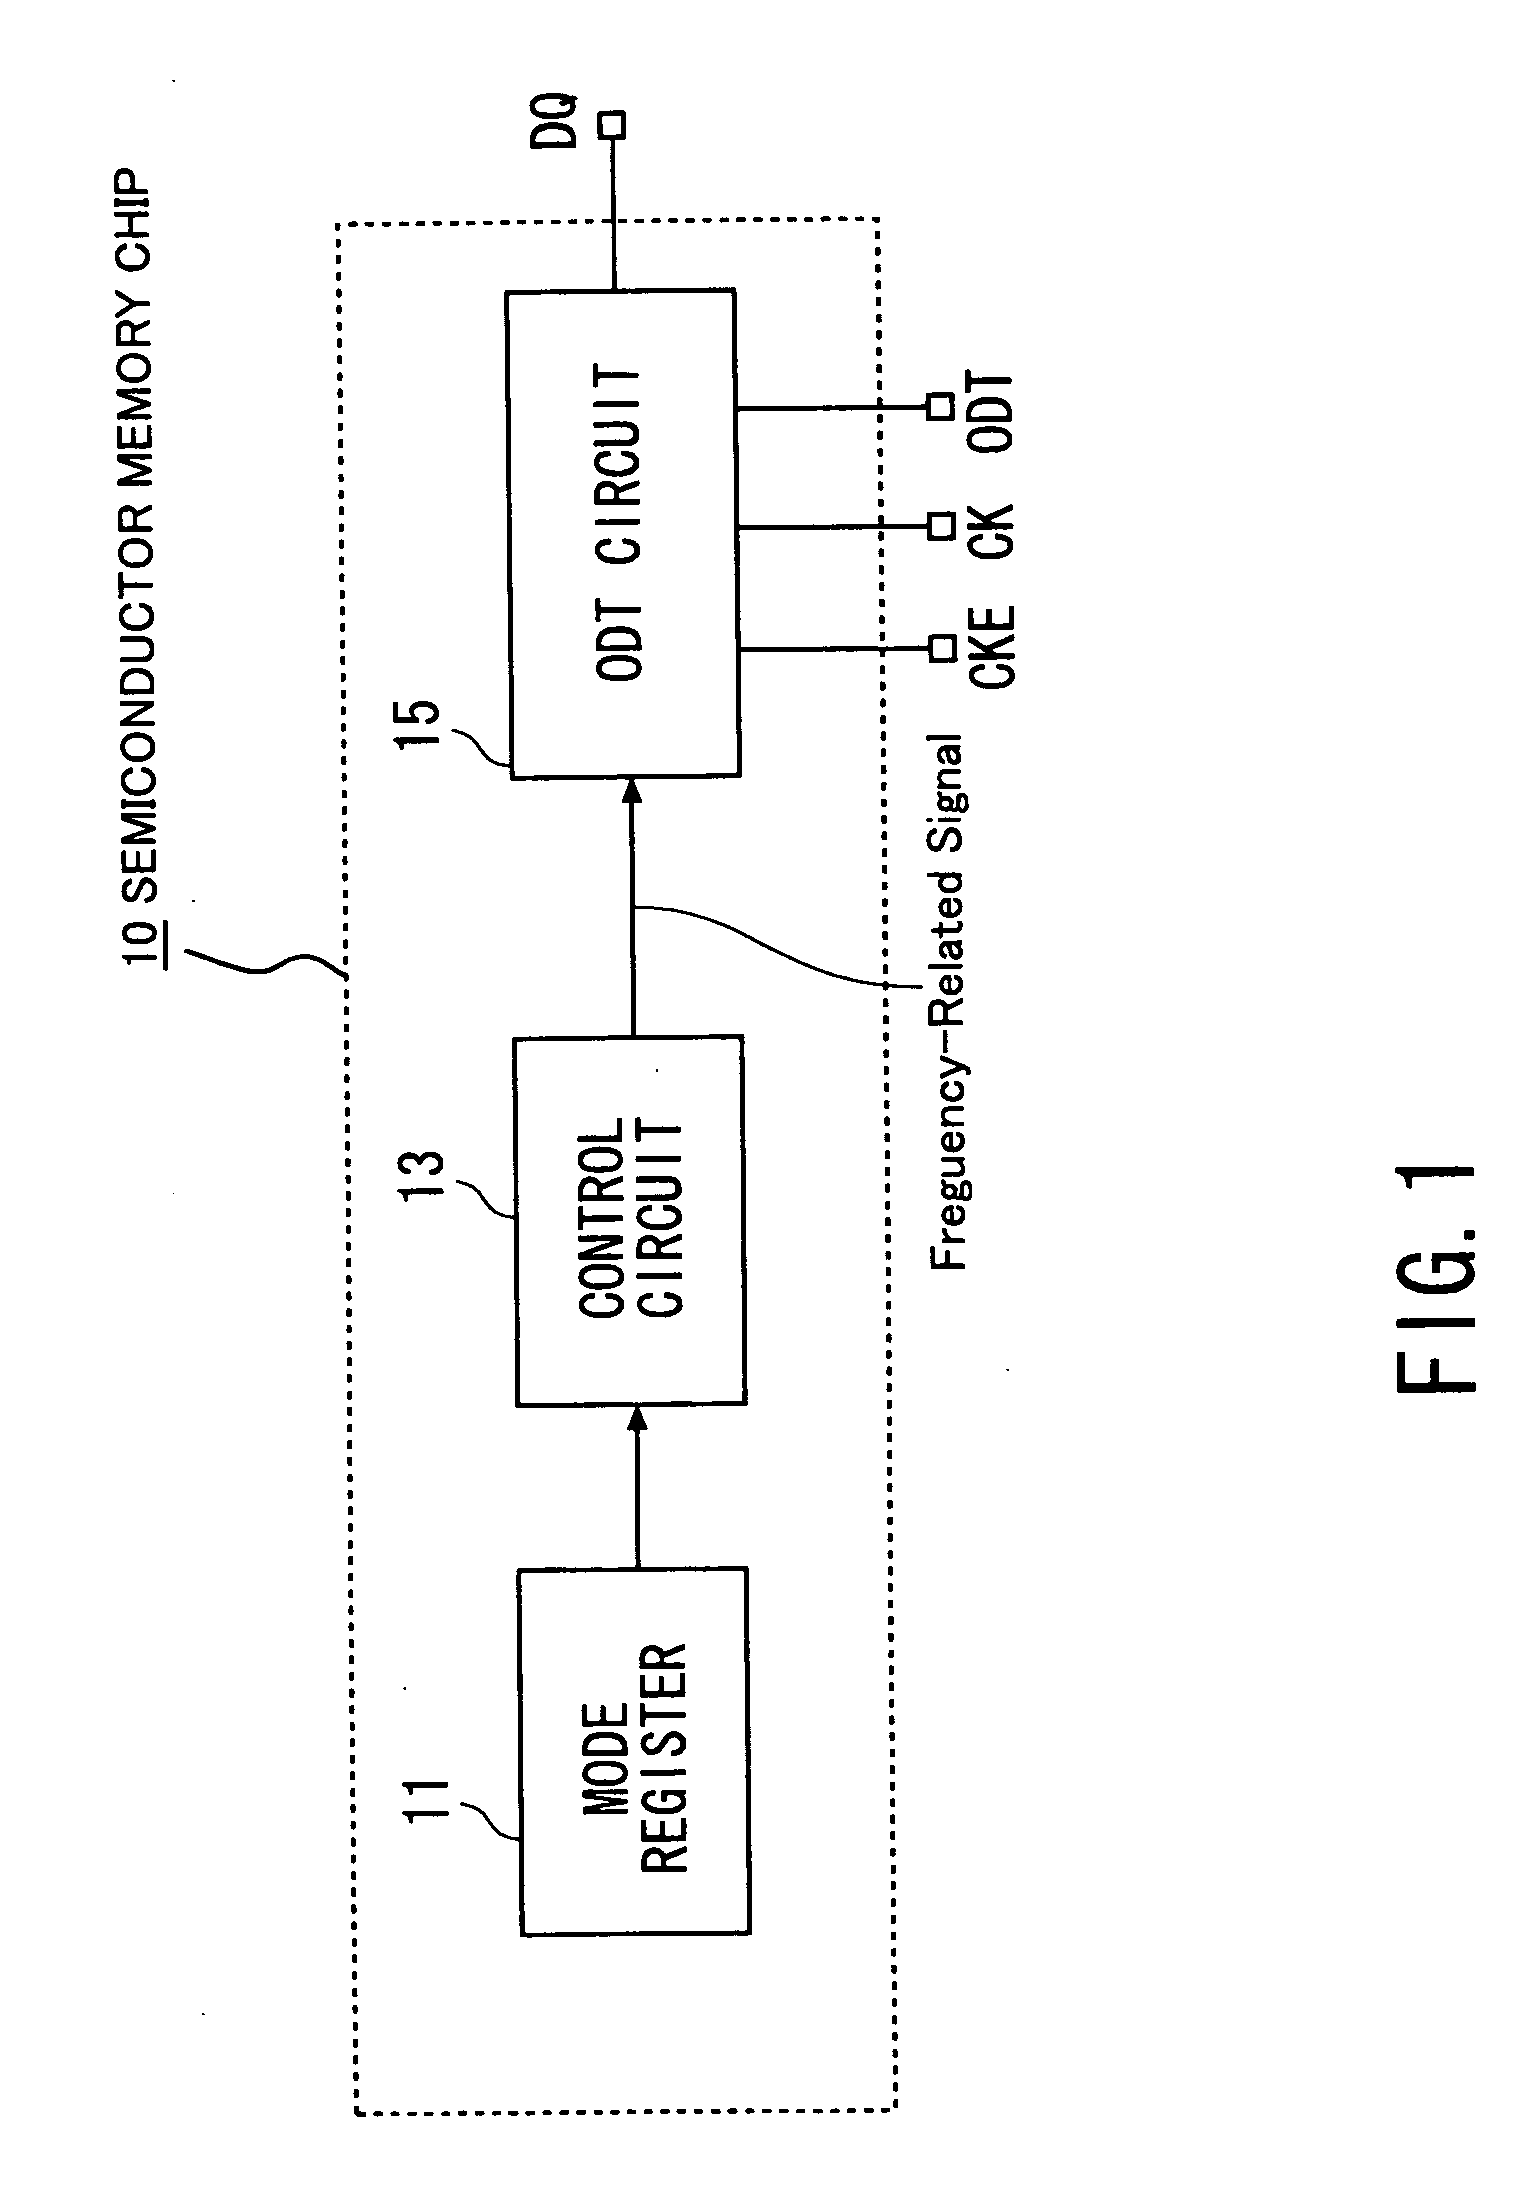 Semiconductor memory chip with on-die termination function